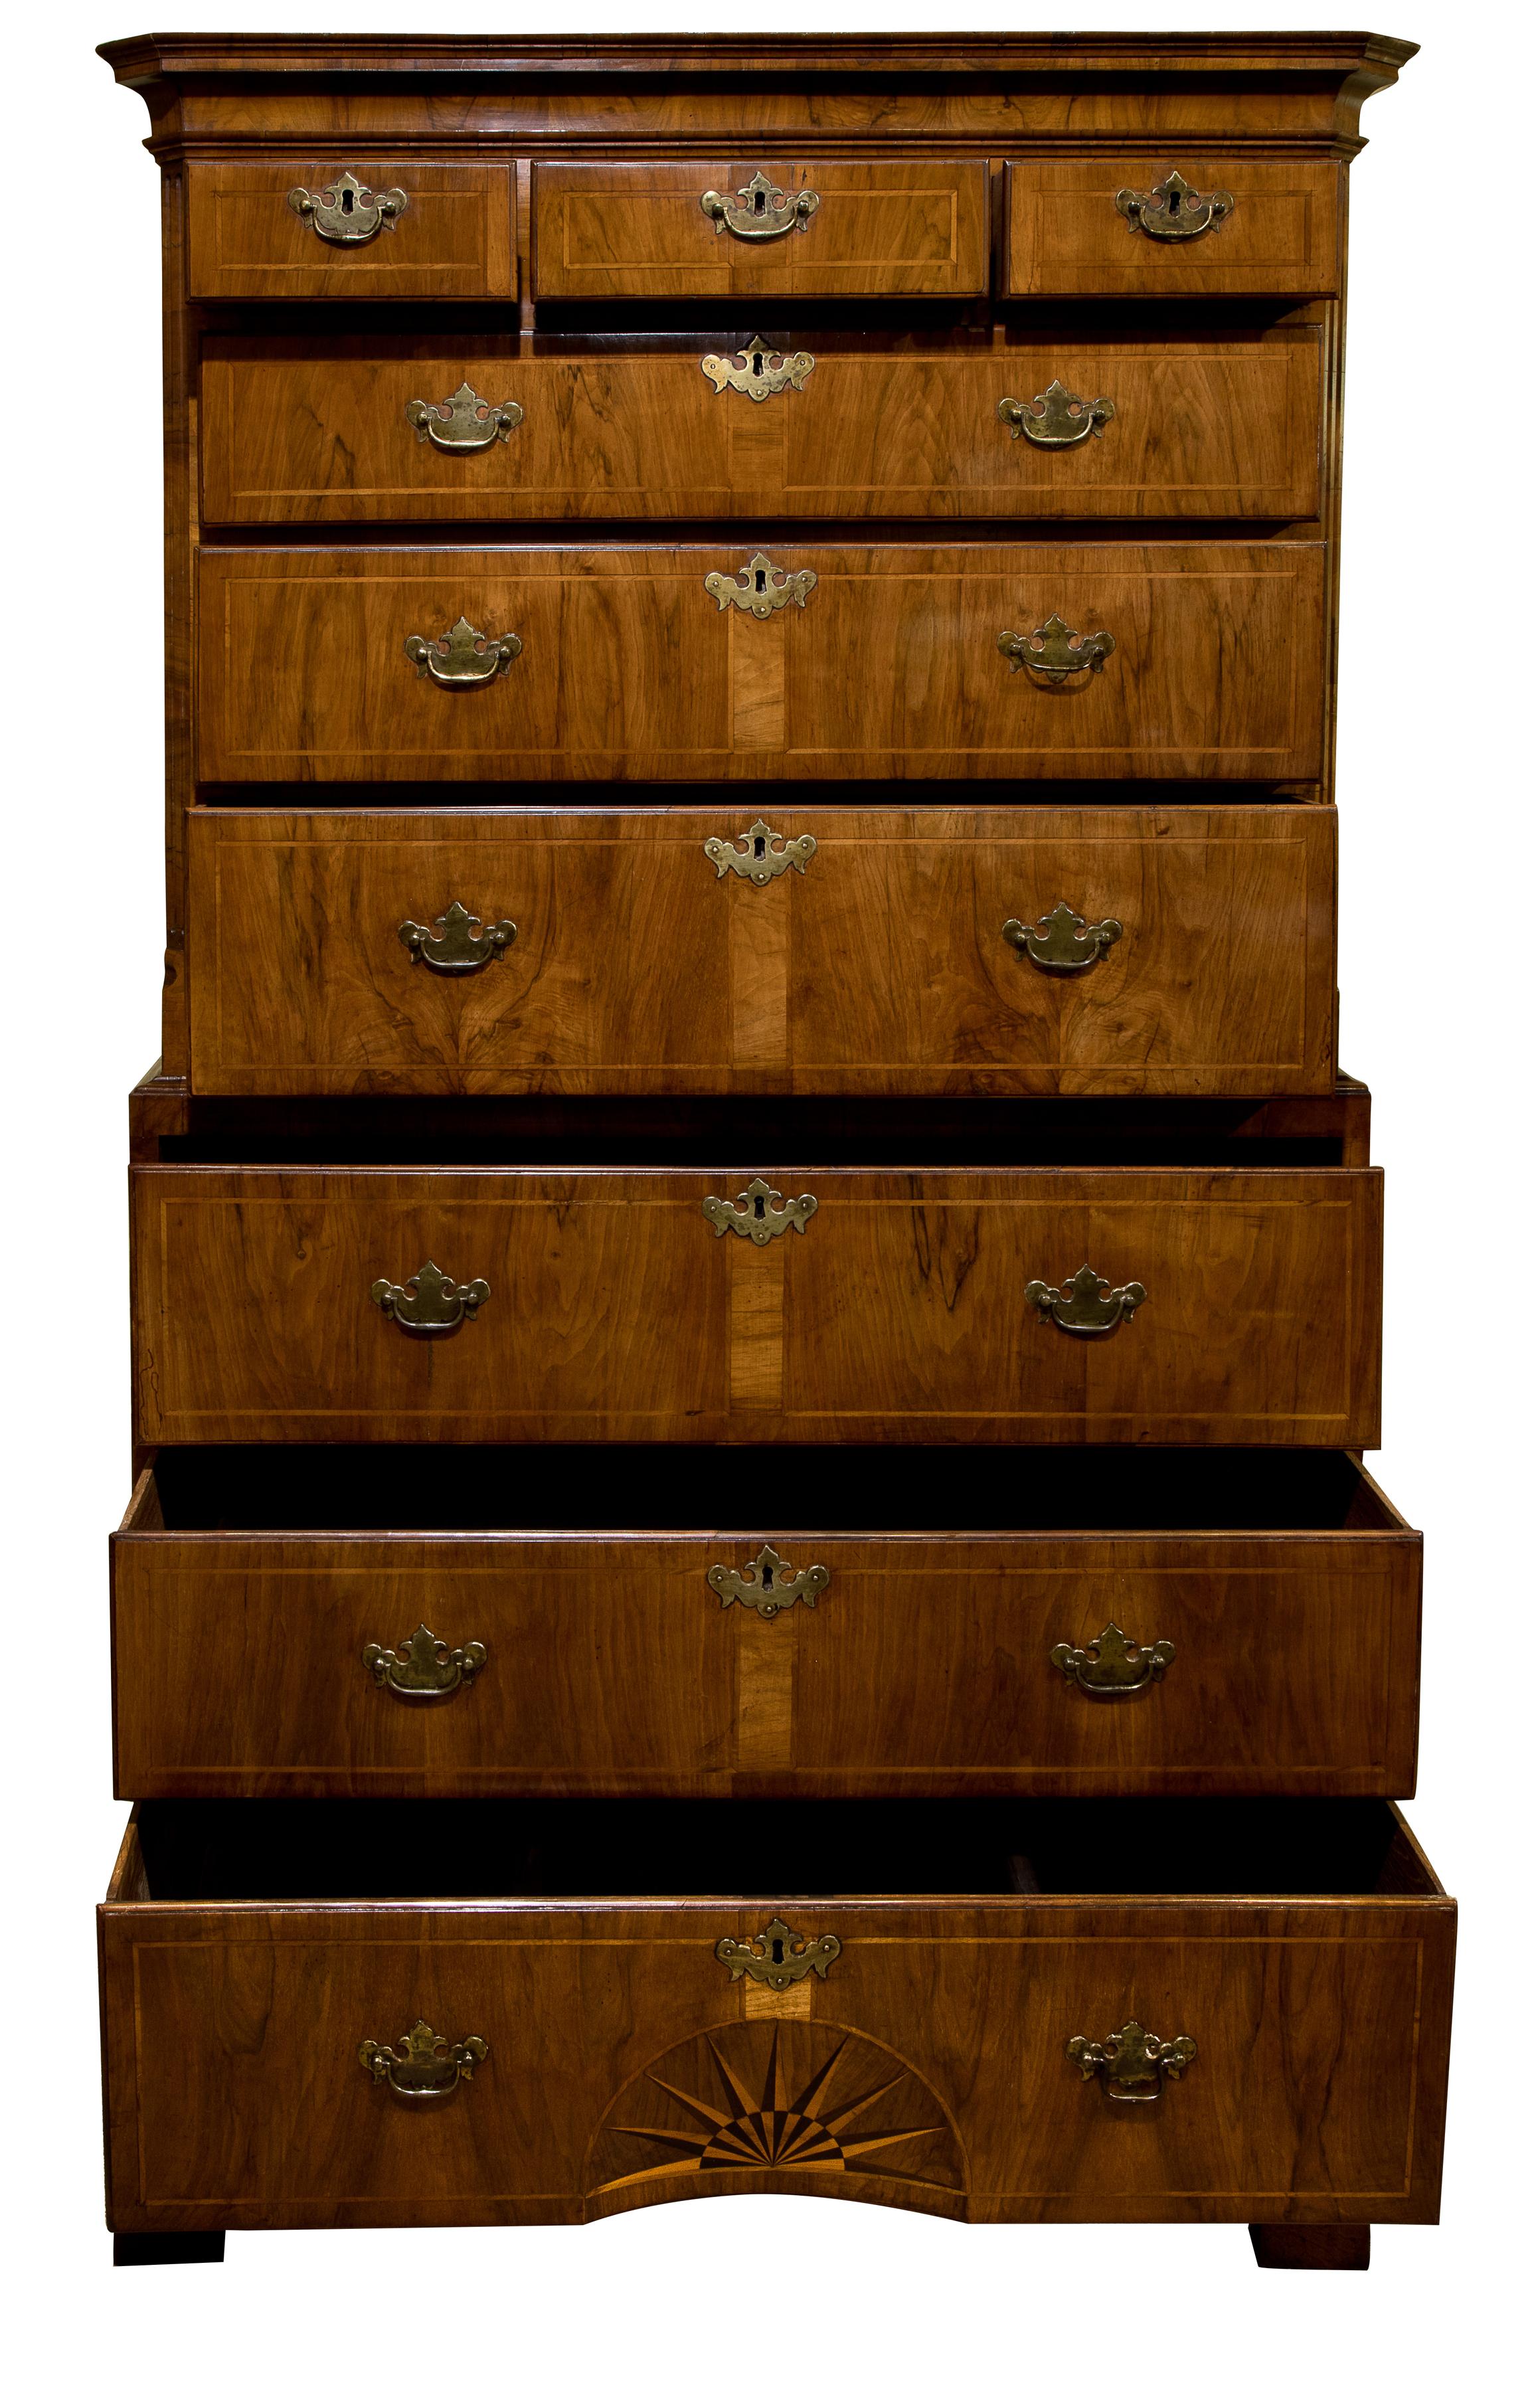 A fine and rare George II walnut secretaire chest on chest with fluted canted corners. The drawer fronts inlaid with a narrow walnut band, the bottom drawer further inlaid with a concave sunburst. The writing drawer stepped and shaped, fitted